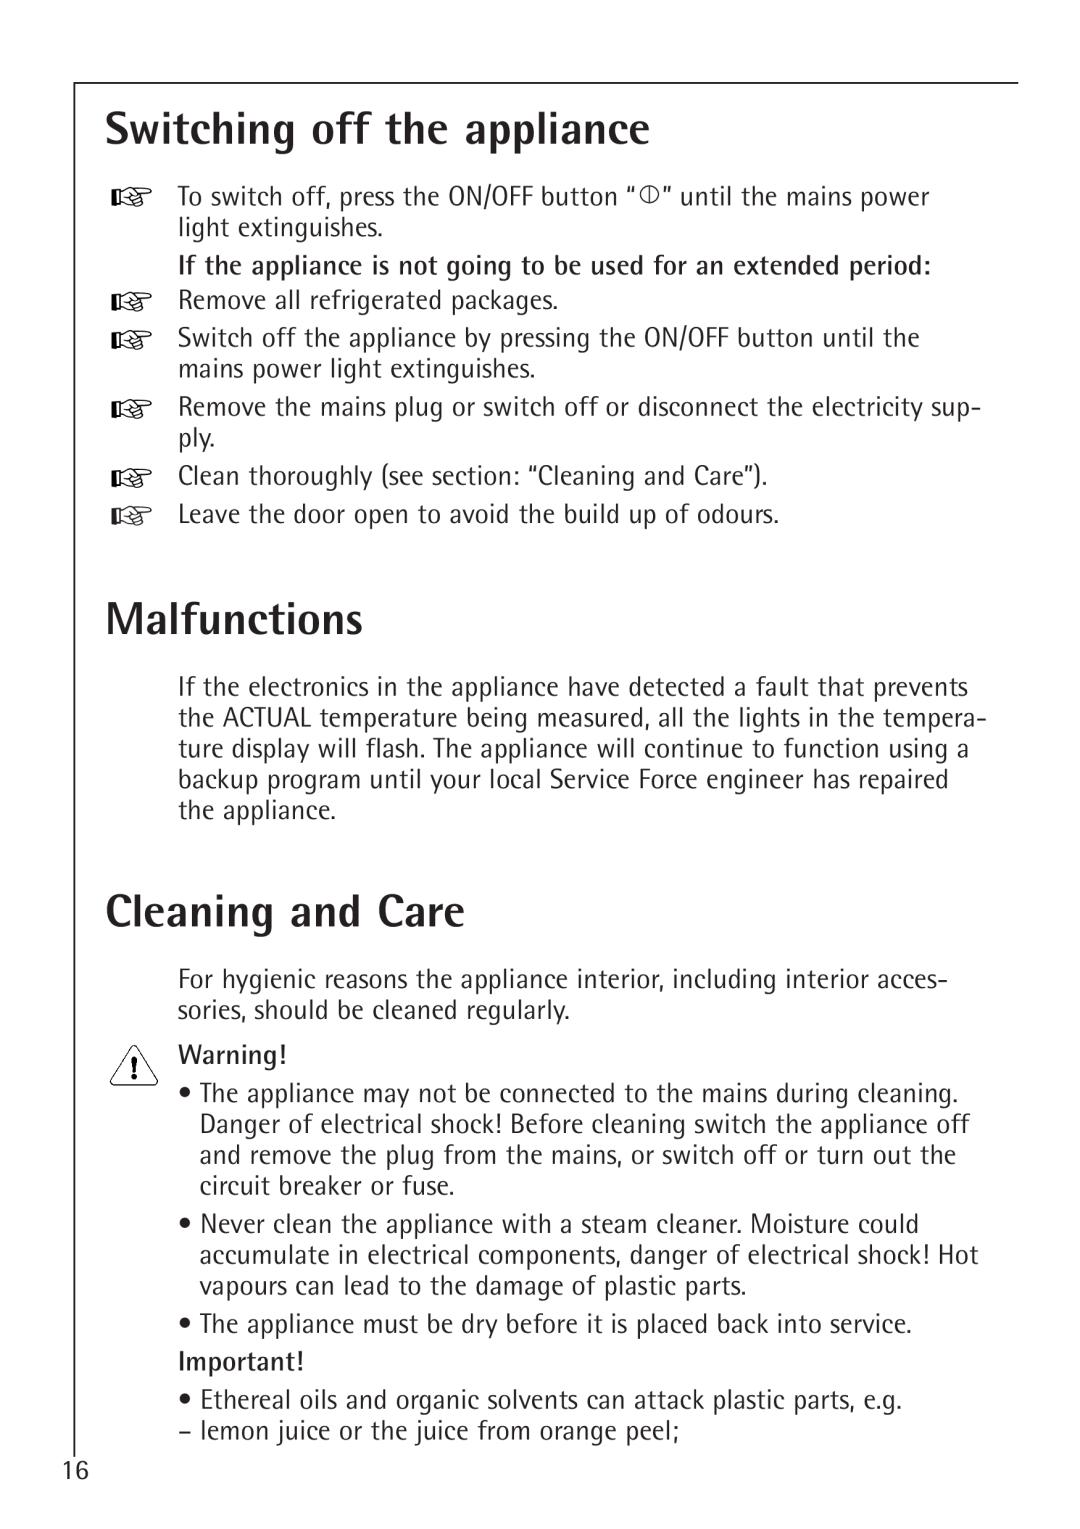 Electrolux 1688-7 TK, 1683-7 TK manual Switching off the appliance, Malfunctions, Cleaning and Care 